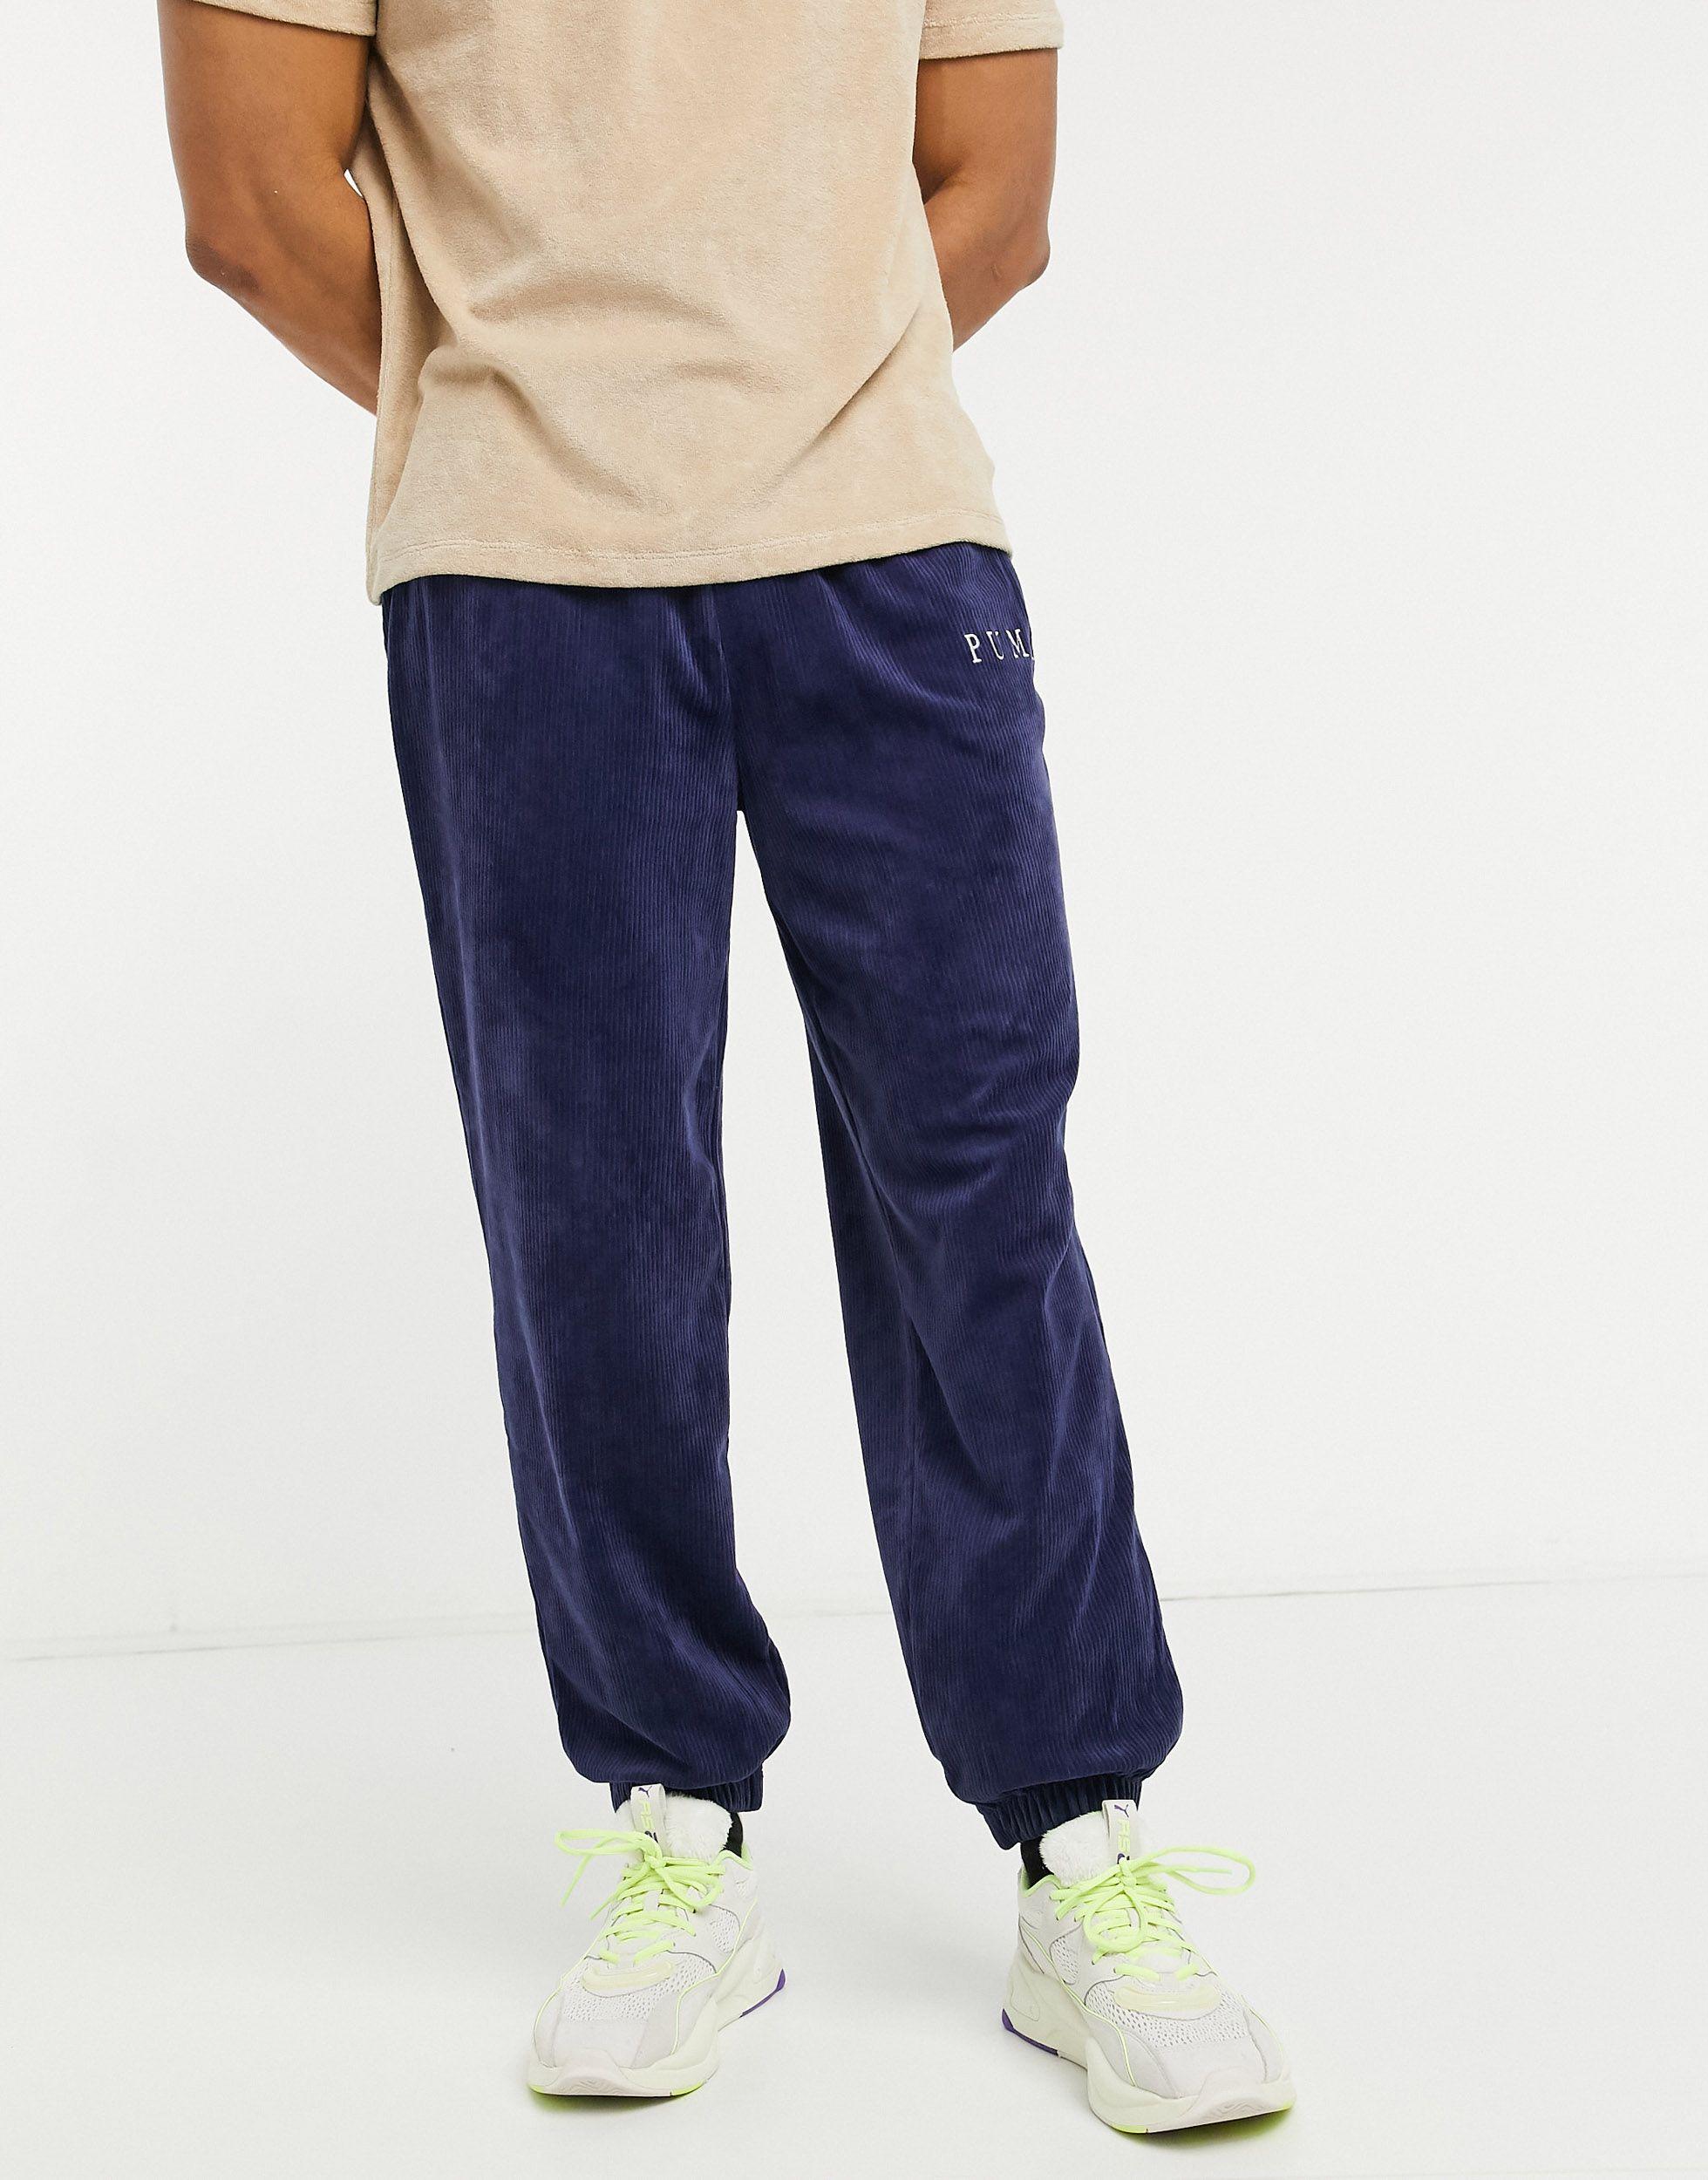 PUMA Cotton Cord joggers in Navy (Blue) for Men - Lyst